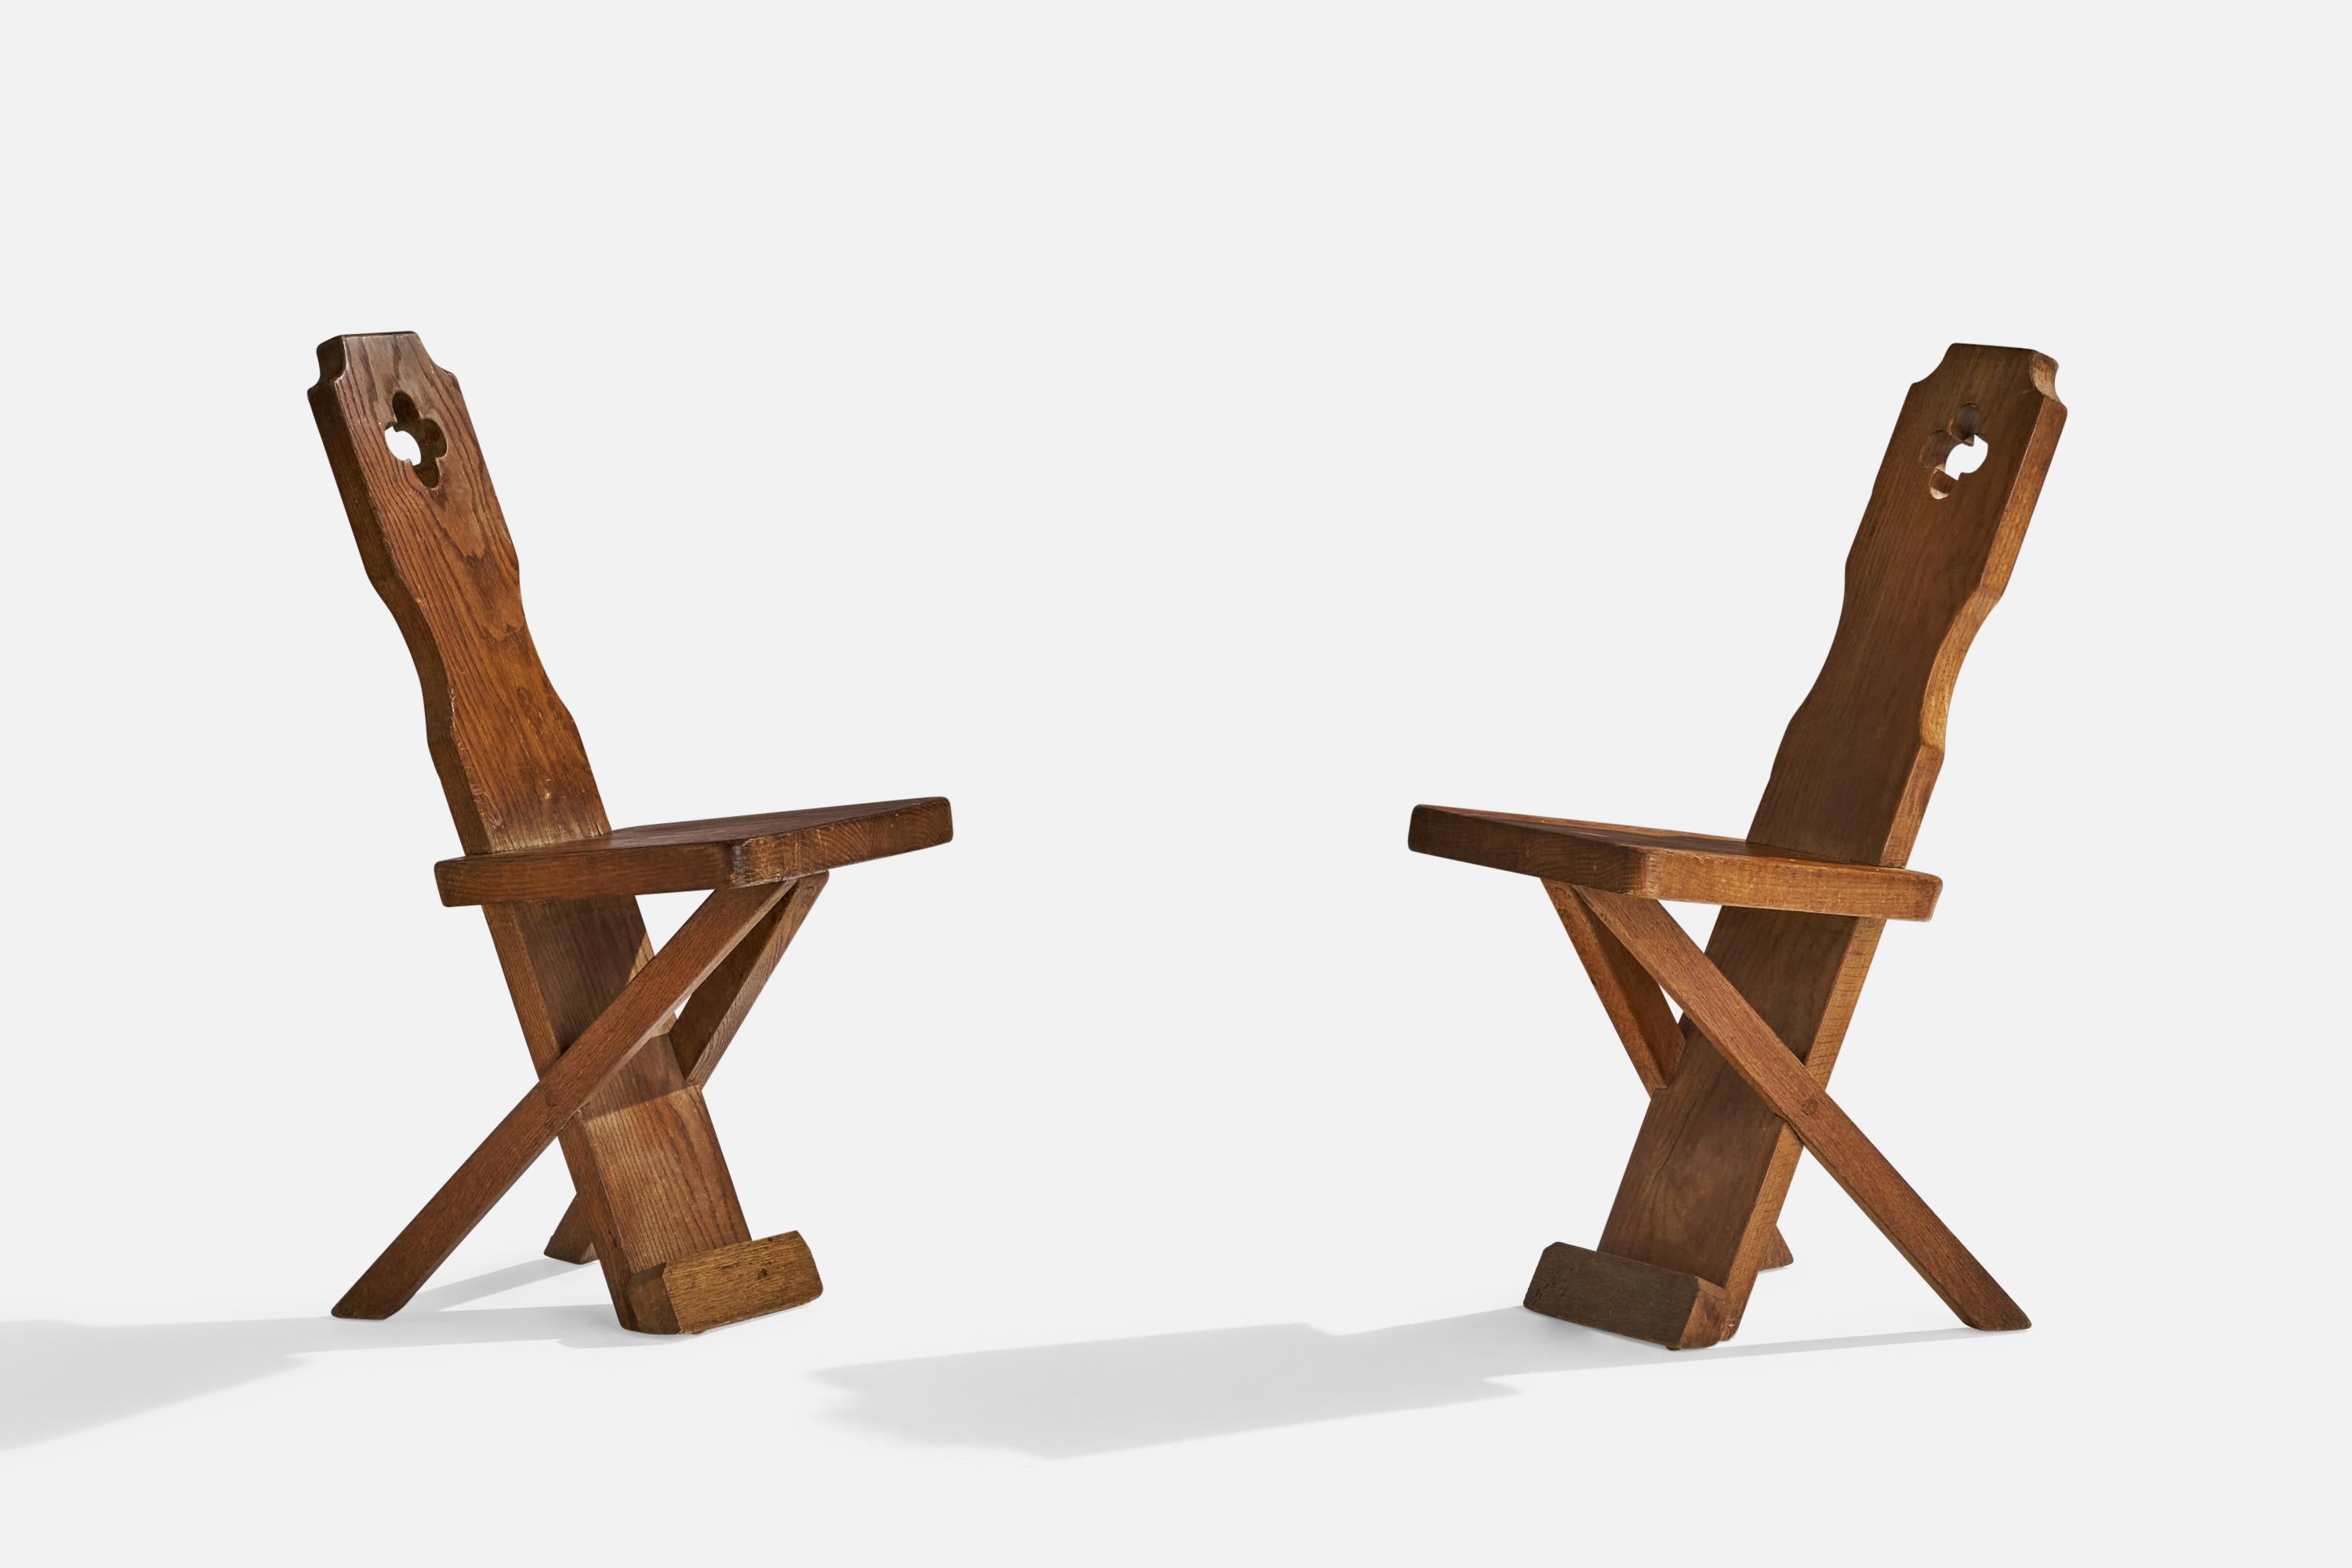 A pair of oak side chairs or dining chairs designed and produced in Denmark, c. 1920s.

Seat height 18”.